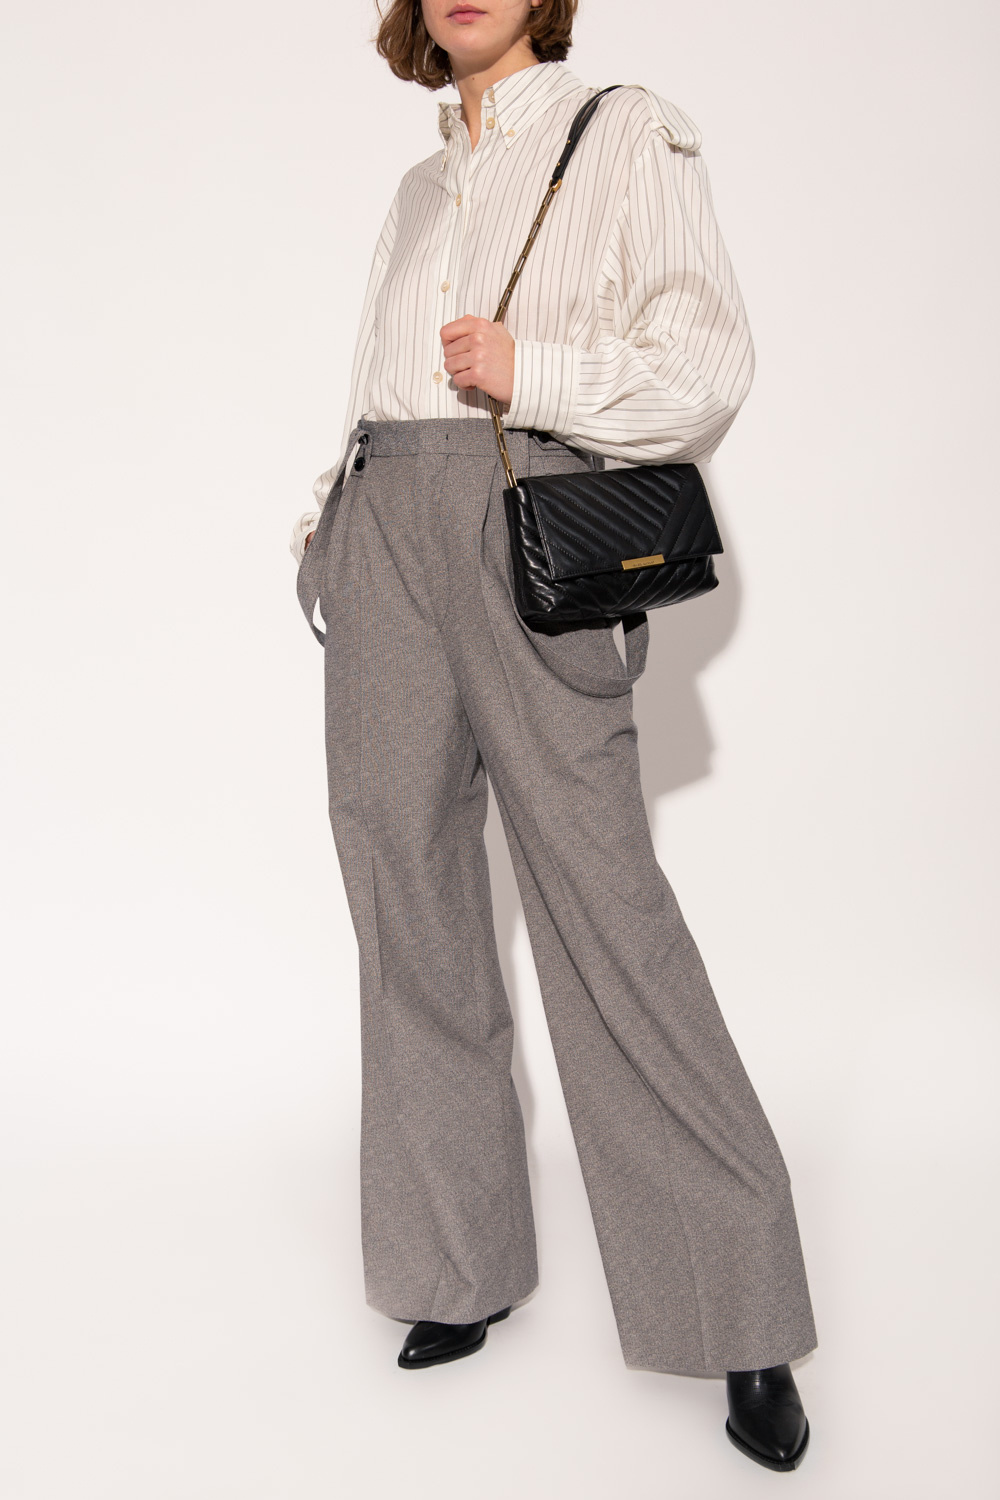 Isabel Marant ’Jessica’ satinset trousers with suspenders